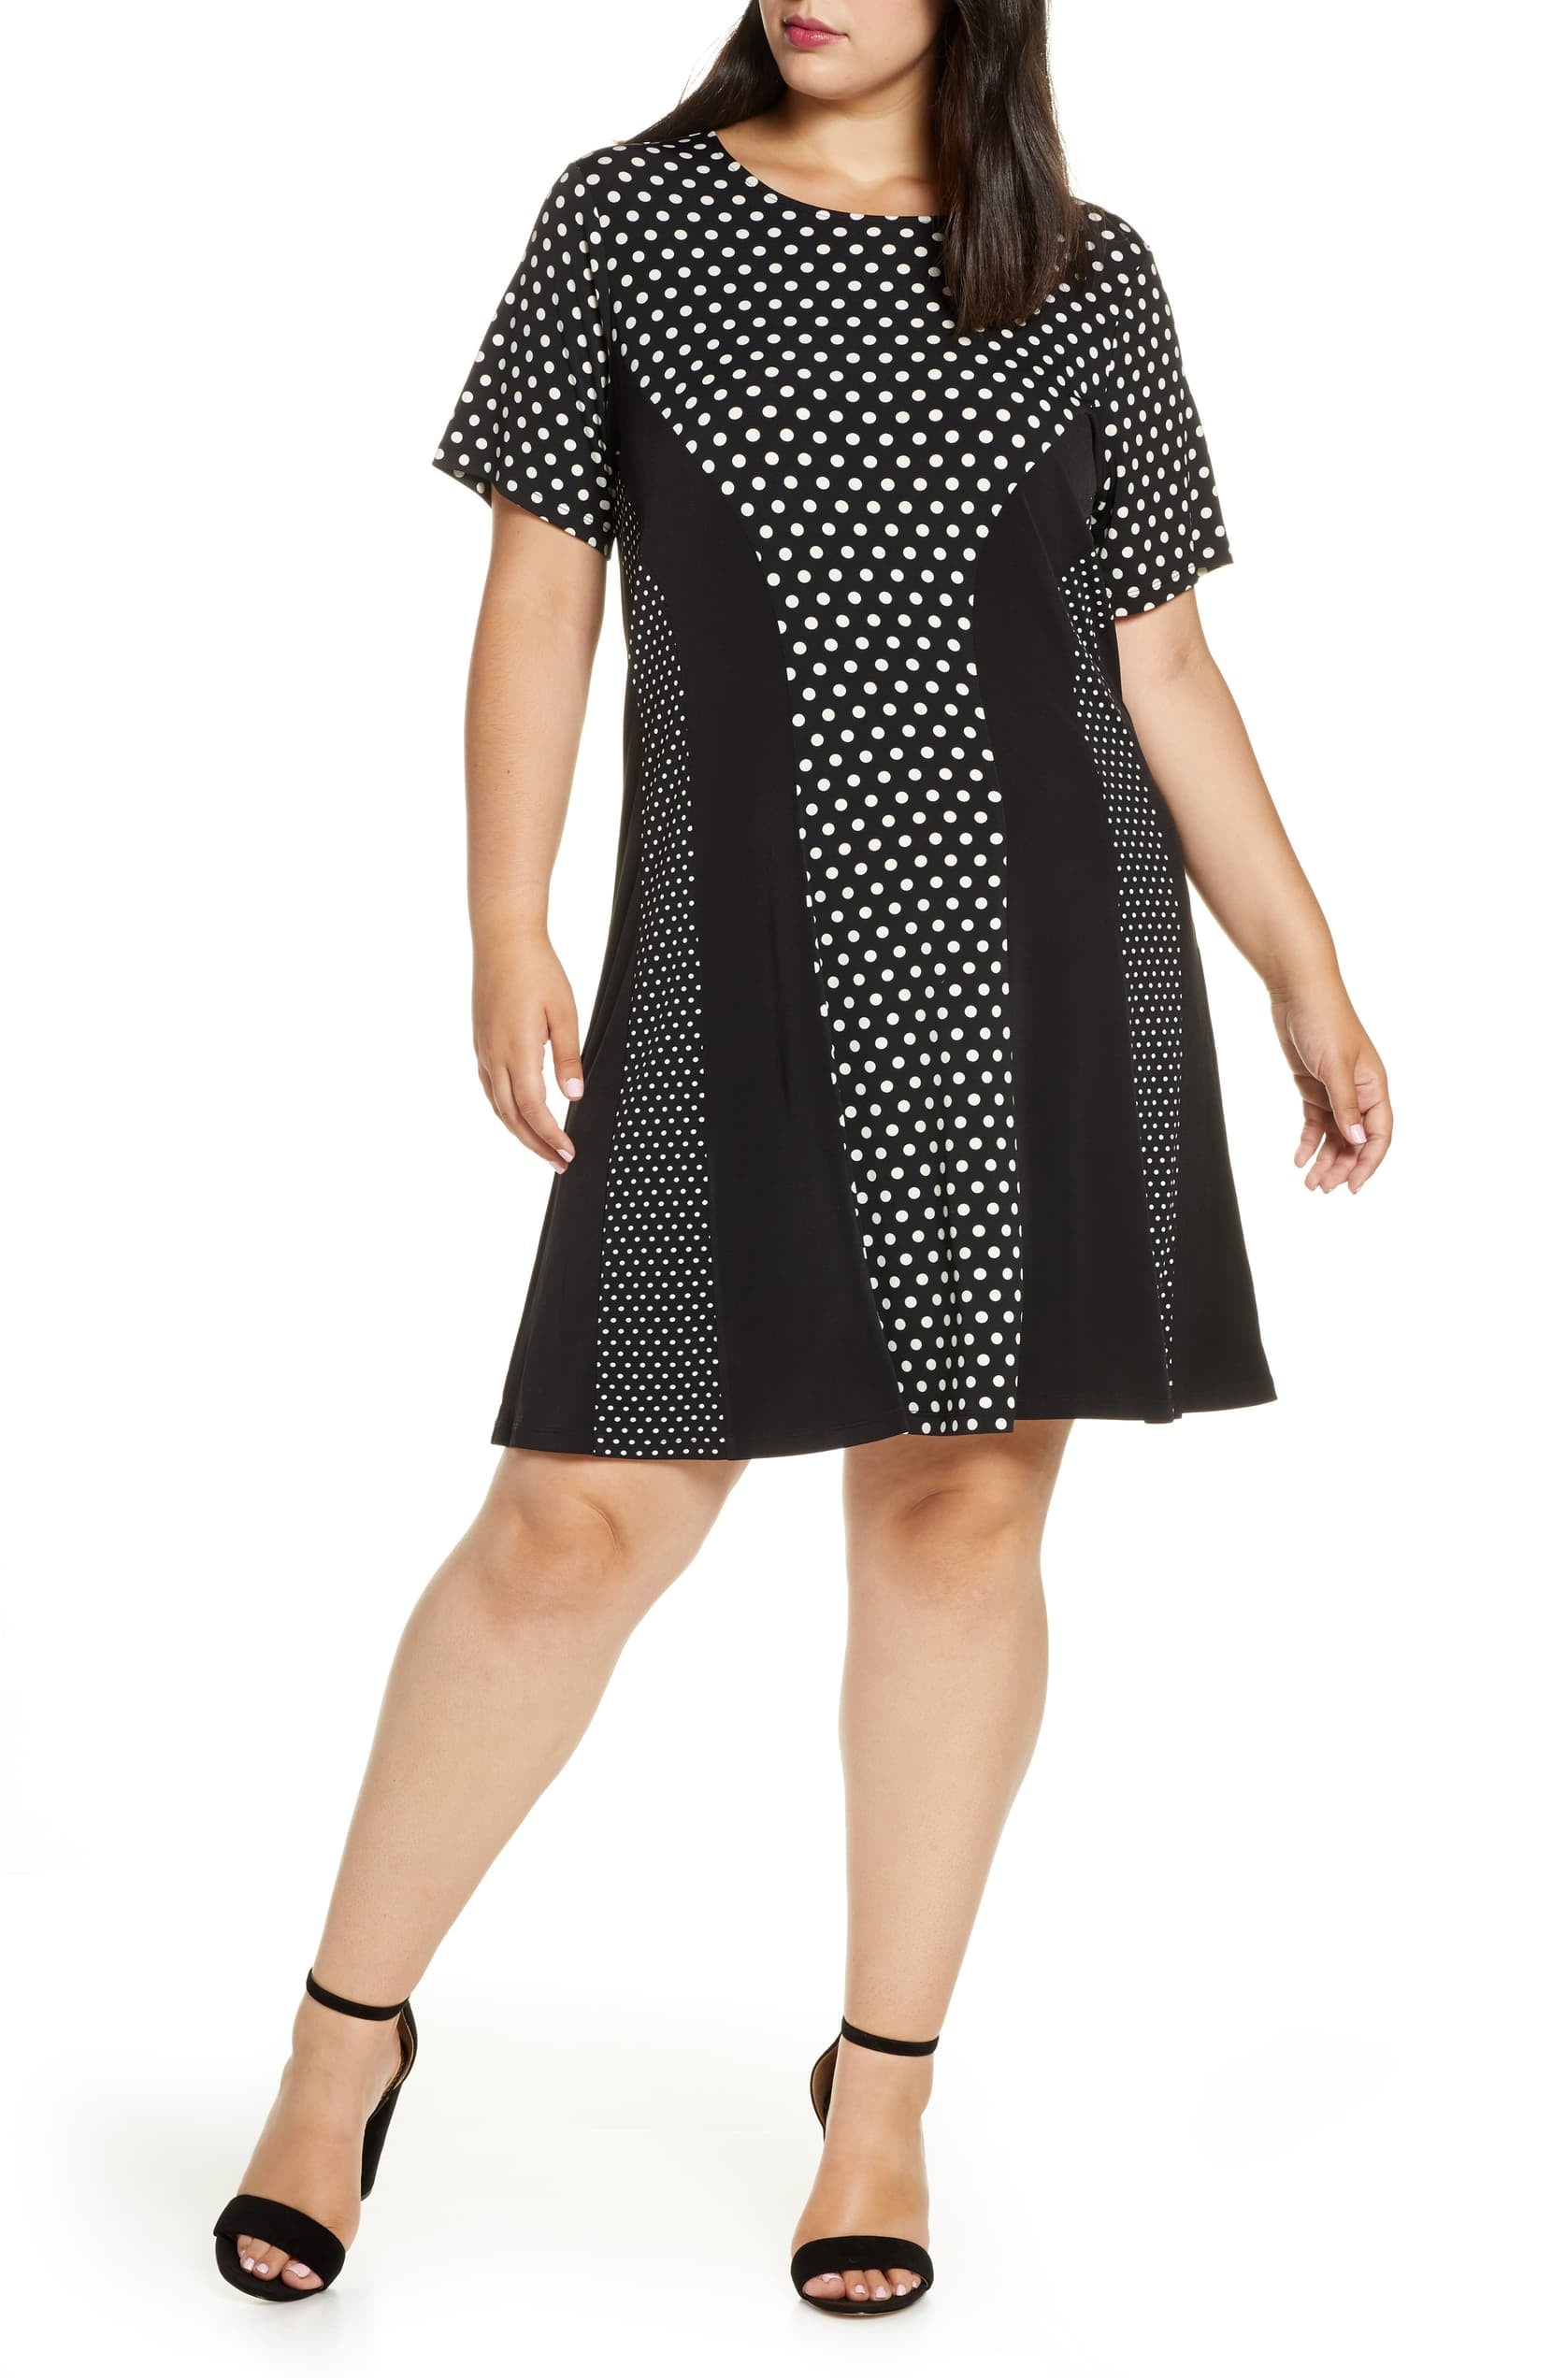 MICHAEL Michael Kors Mod Dot Combo Dress | 20 Work Dresses For Fall You'll  Want to Wear to the Office Monday Through Friday | POPSUGAR Fashion Photo 20